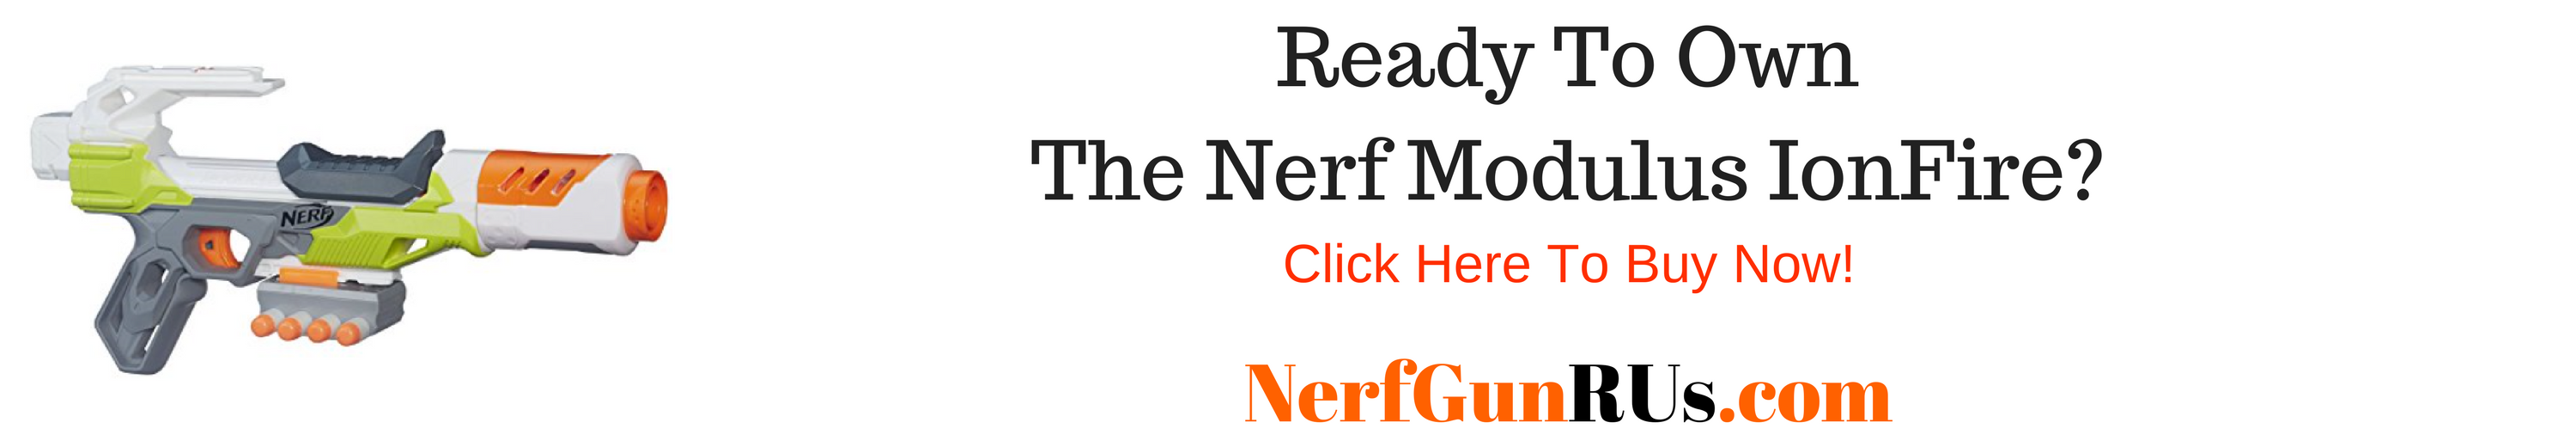 Ready To OwnThe Nerf Modulus IonFire | NerfGunRUs.com